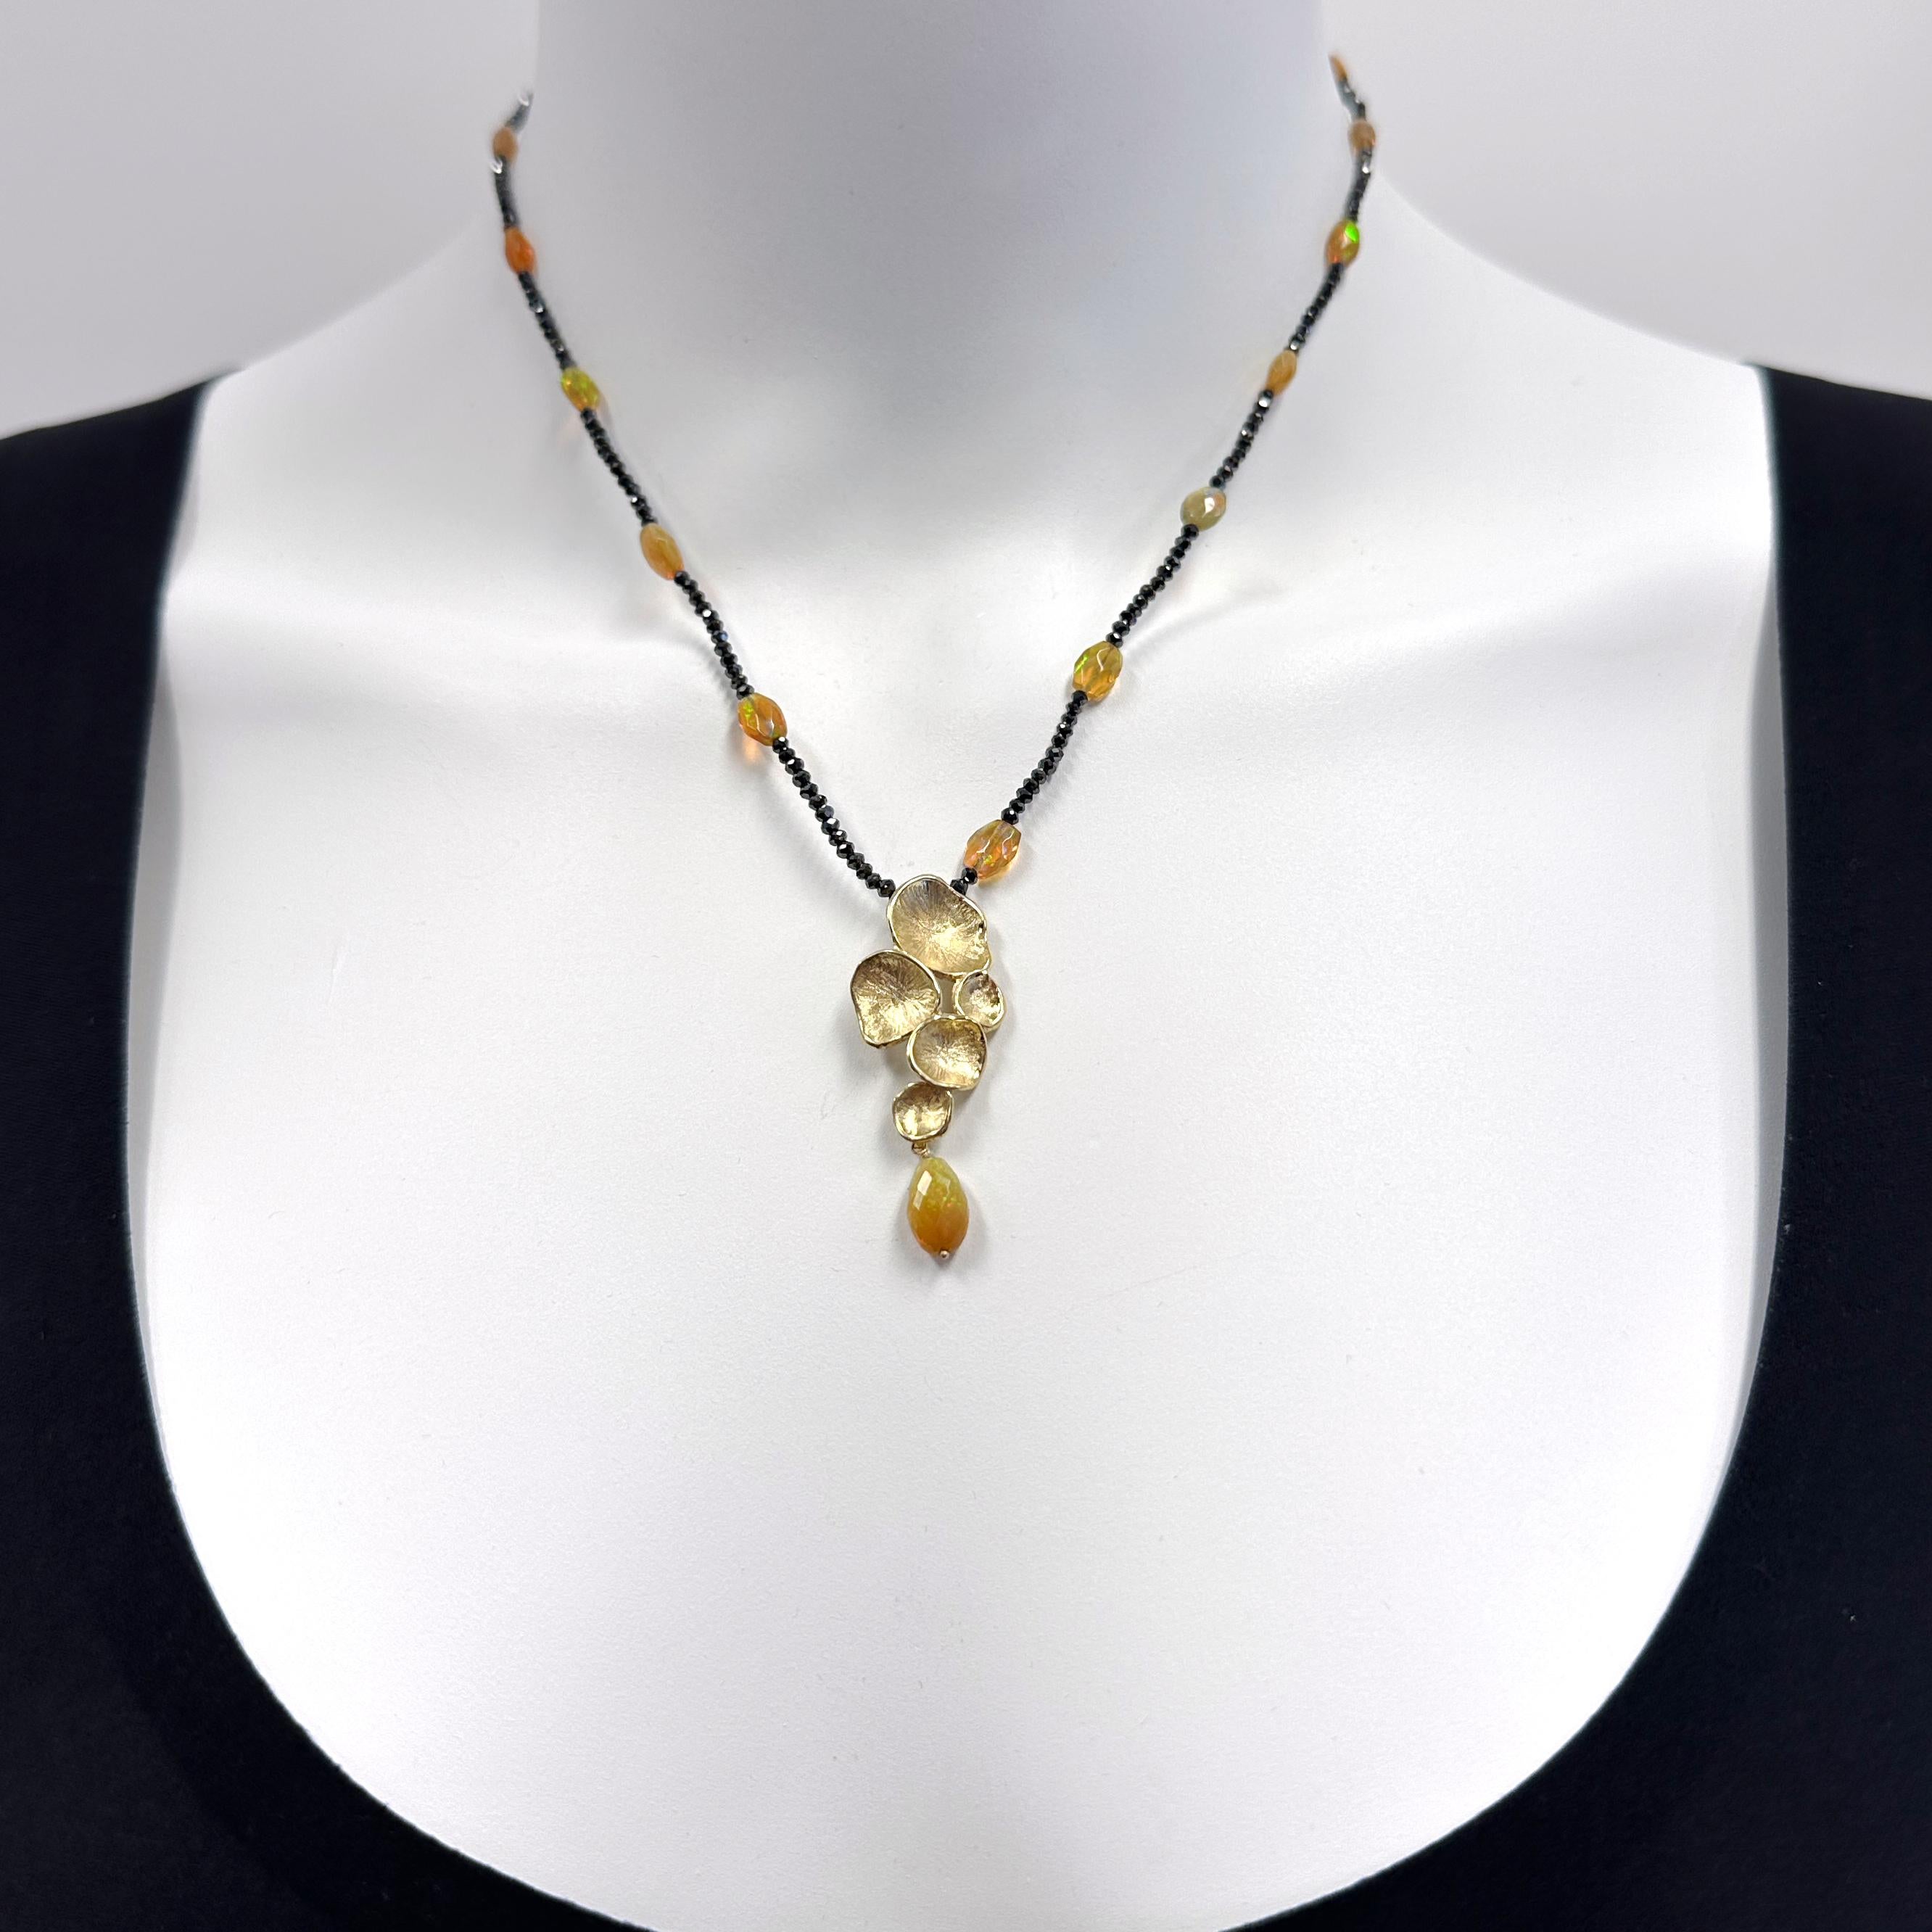 Eytan's design of cascading peperomia leaves is one he's used for many different pieces, but each piece is unique.  This time, he's made it into a pendant with a faceted opal bead drop to serve as the centerpiece on a station necklace of black